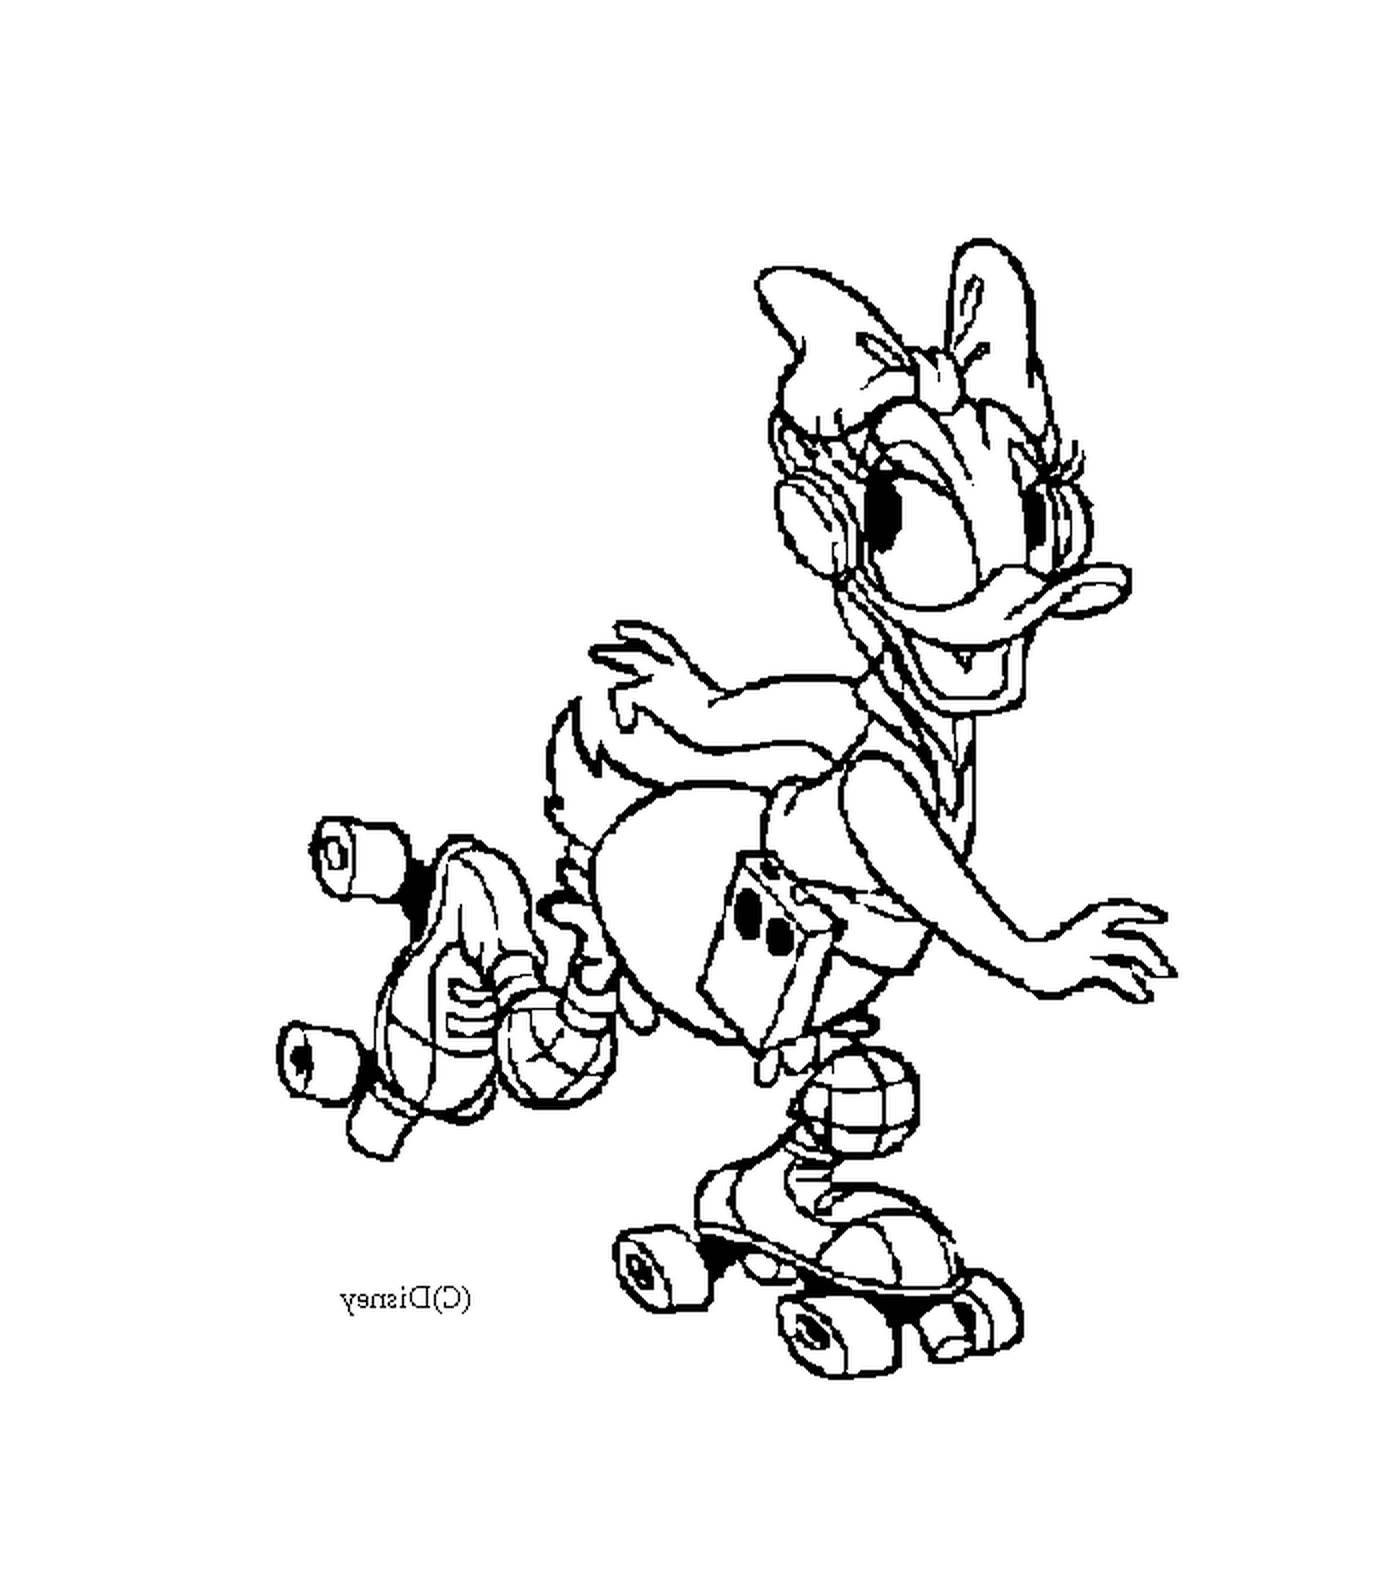  Daisy skates while listening to music 